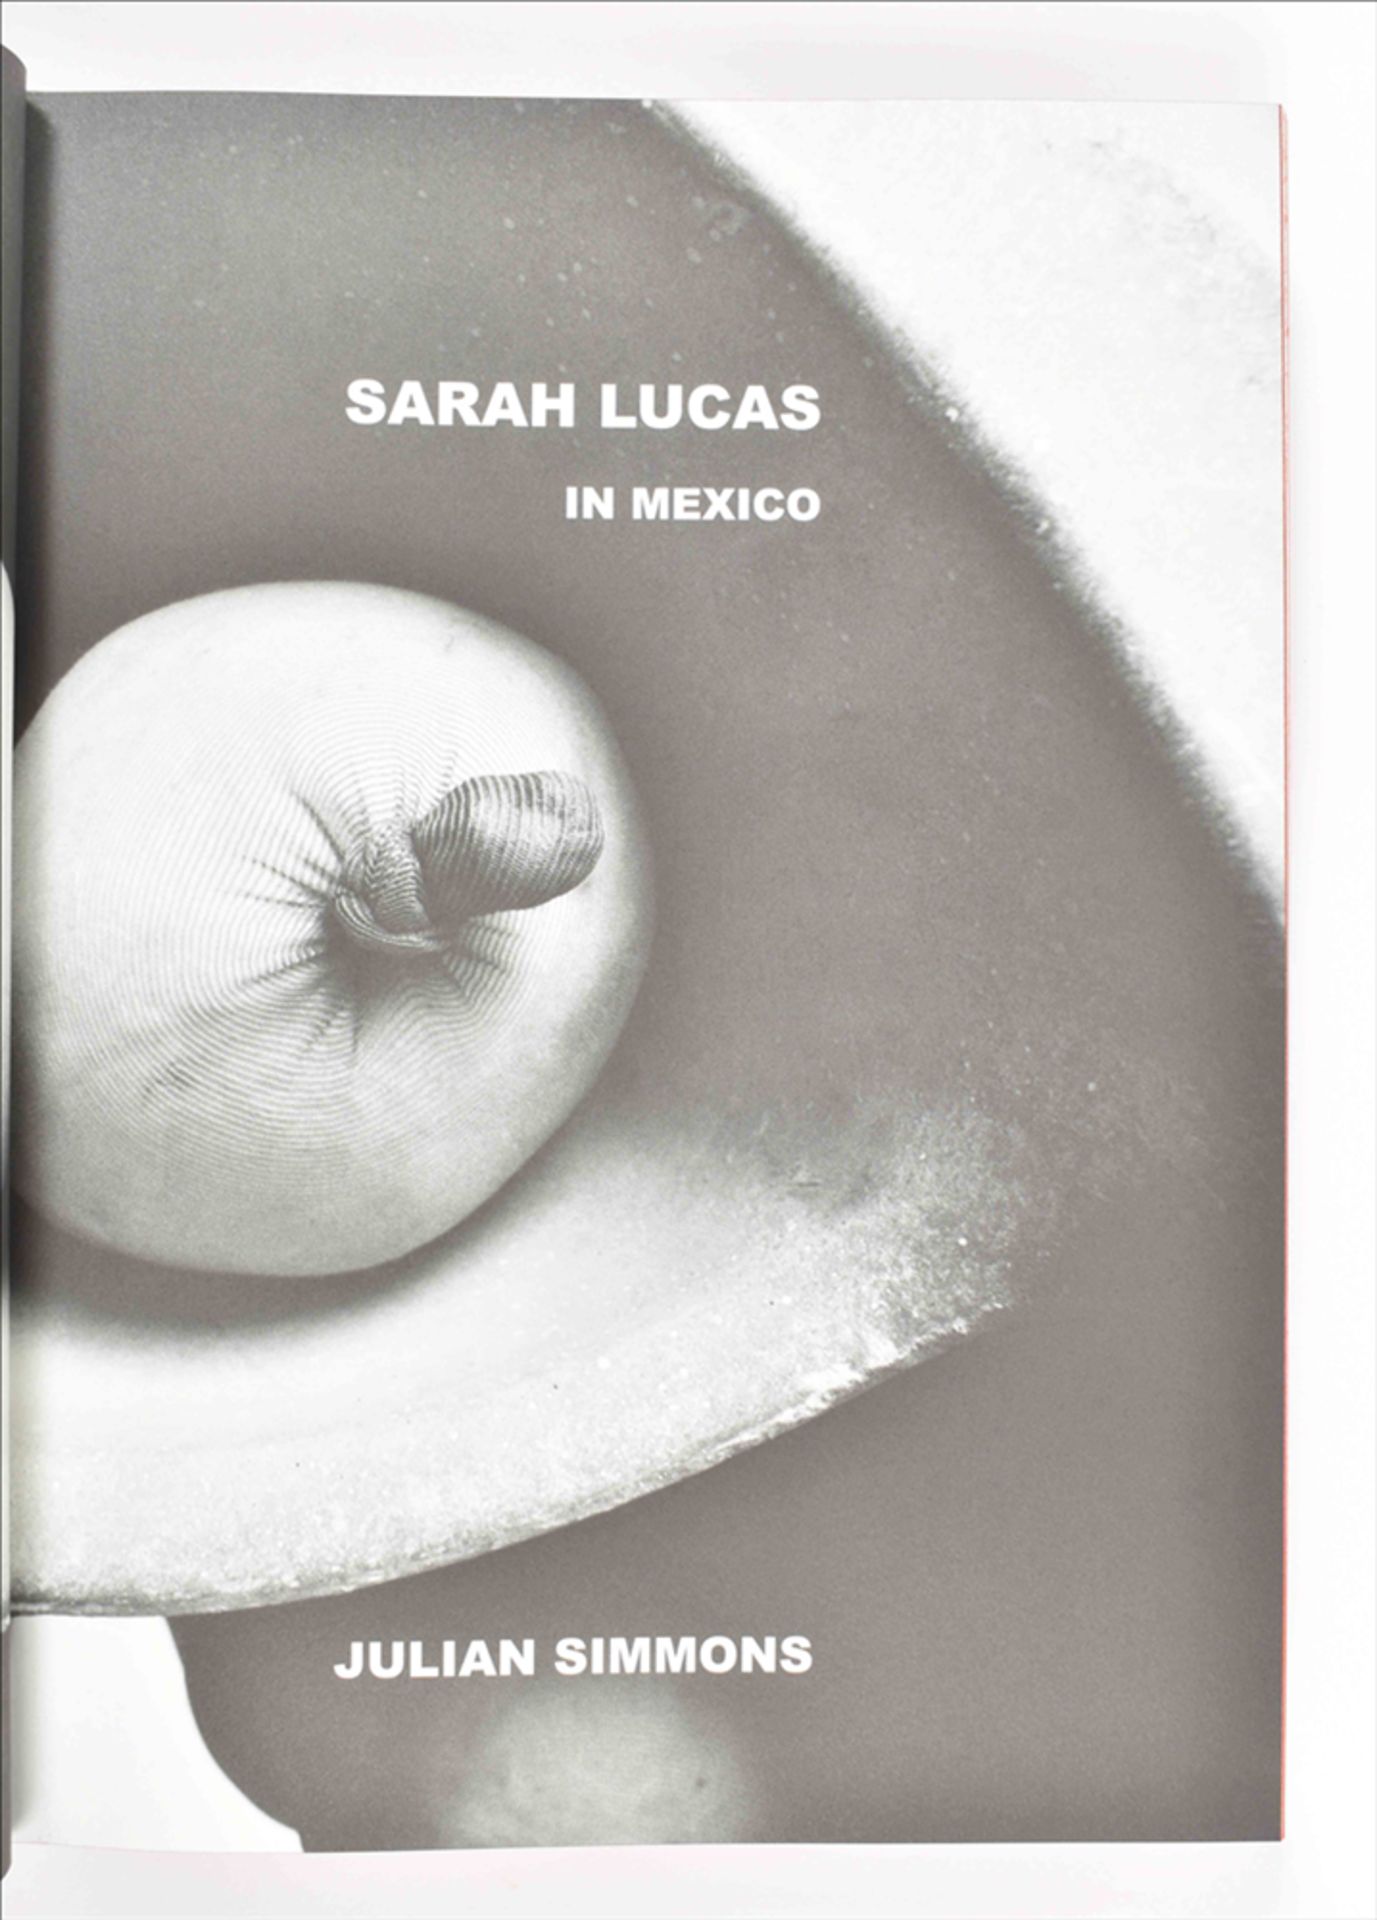 Sarah Lucas, two artists' publications - Image 4 of 8